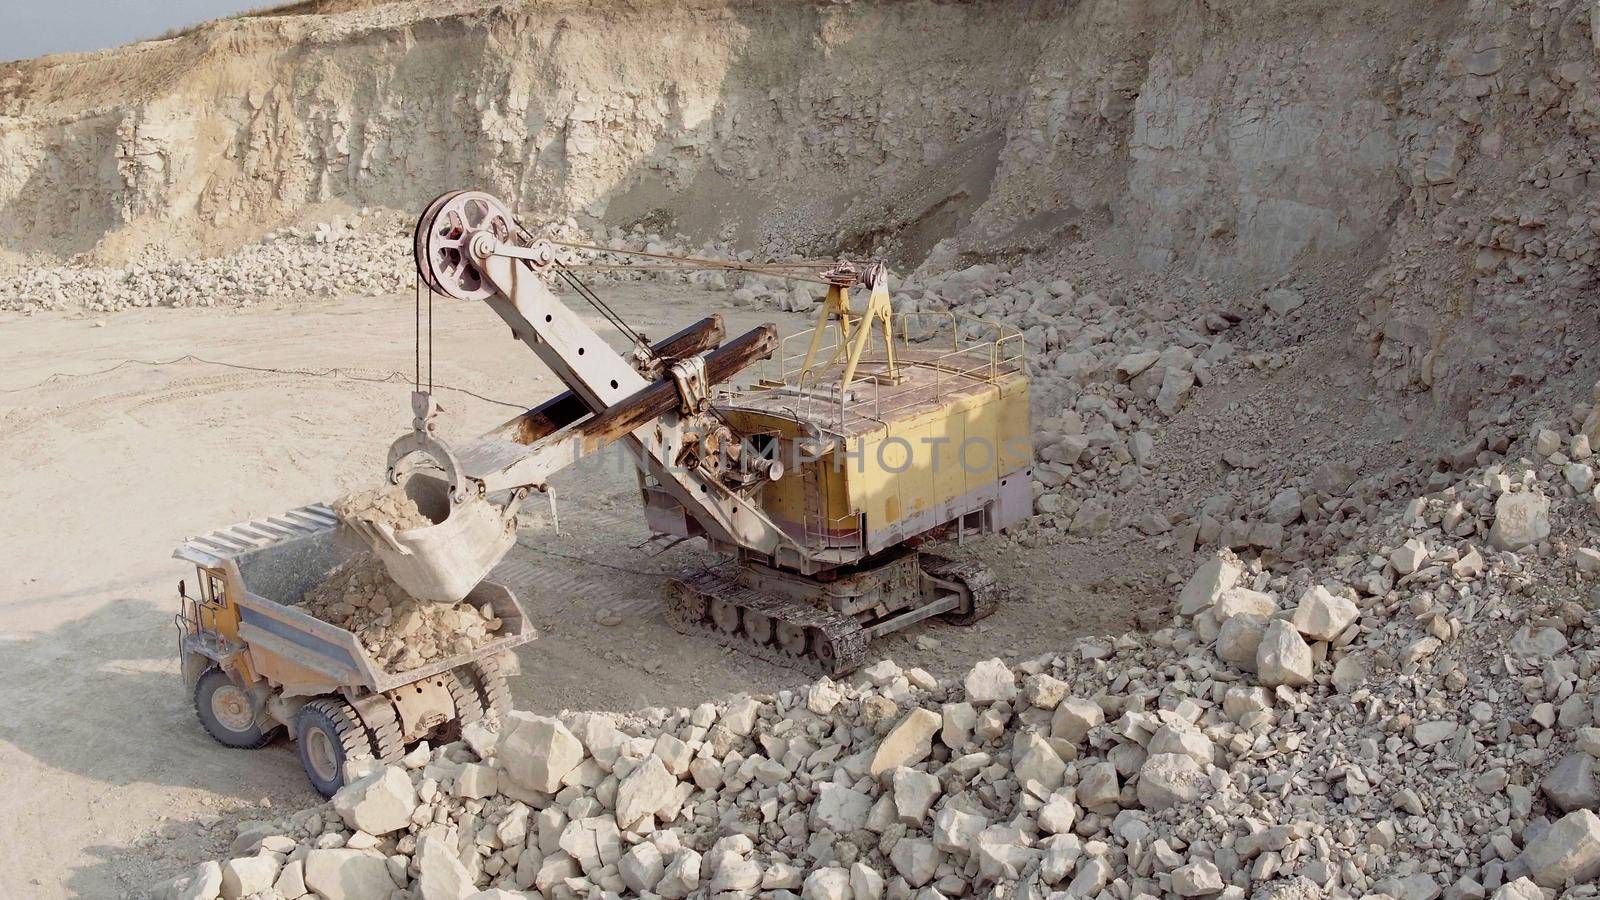 Large electric bucket excavator loads coal into a large dump truck. Mining industry. Heavy industry